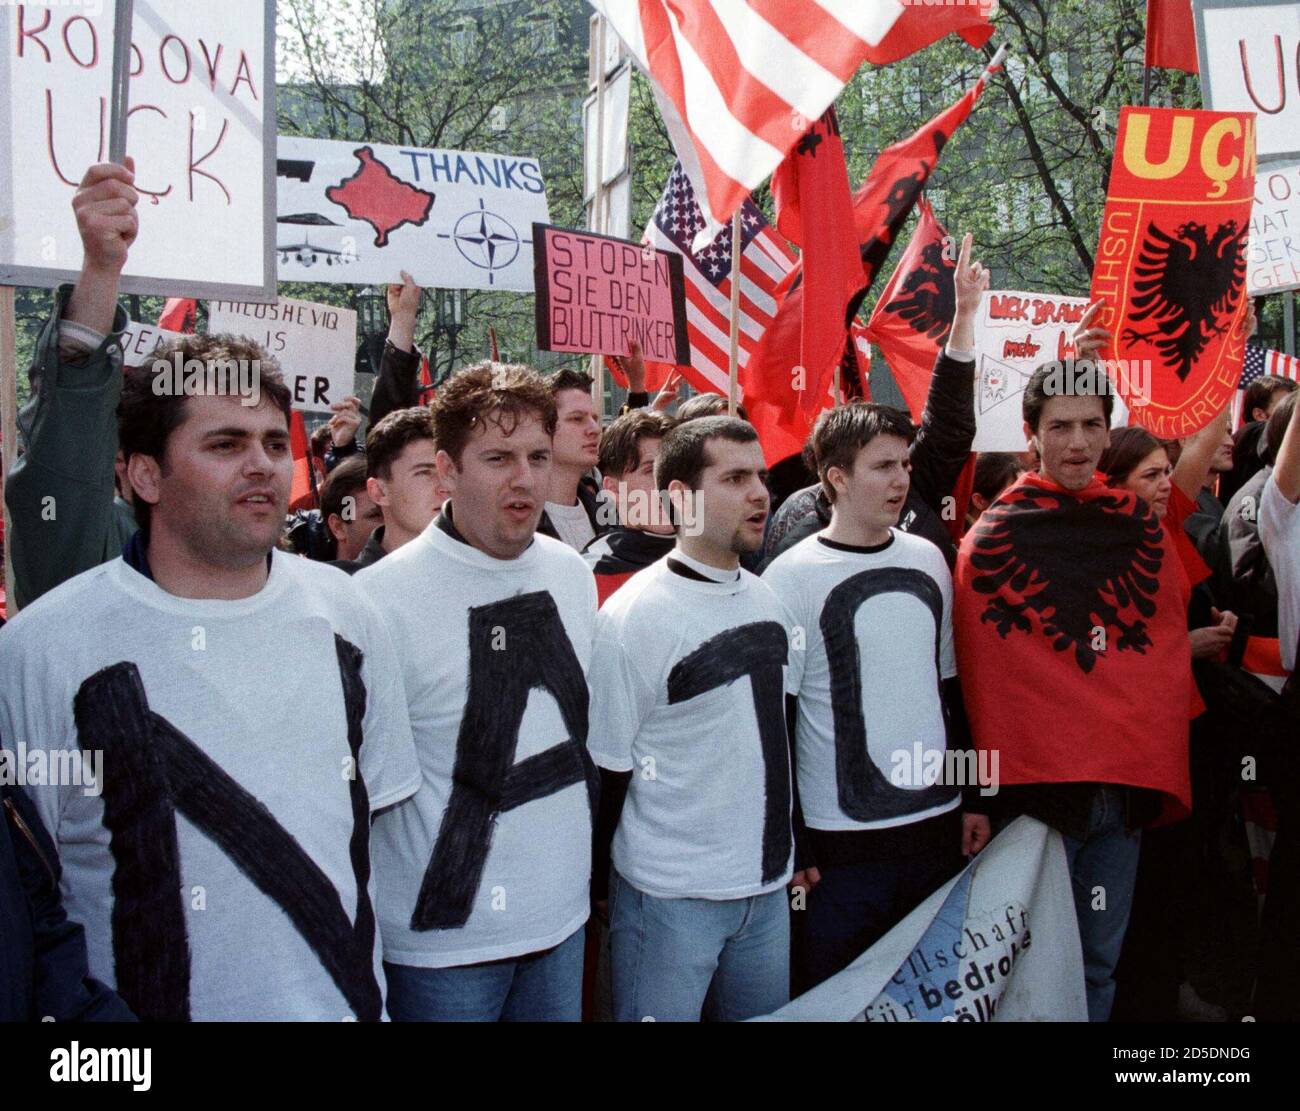 kosovo-albanians-demonstrate-to-support-nato-airstrikes-over-kosovo-march-31-some-300-protesters-shouted-slogans-in-support-of-ethnic-albanian-leader-ibrahim-rugova-2D5DNDG.jpg